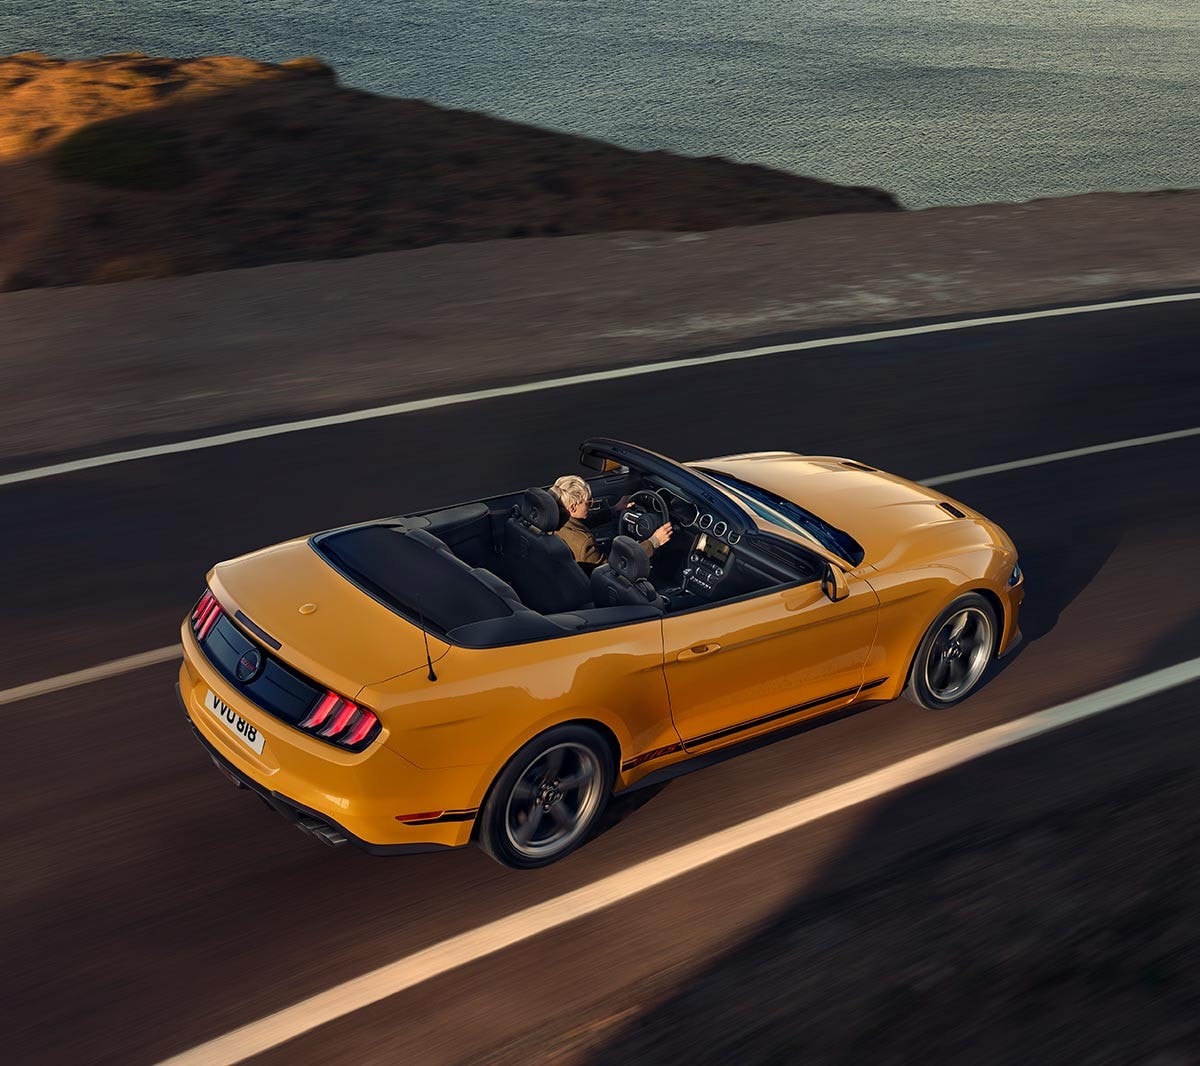 Ford Mustang California Edition driving along a highway viewed from above.